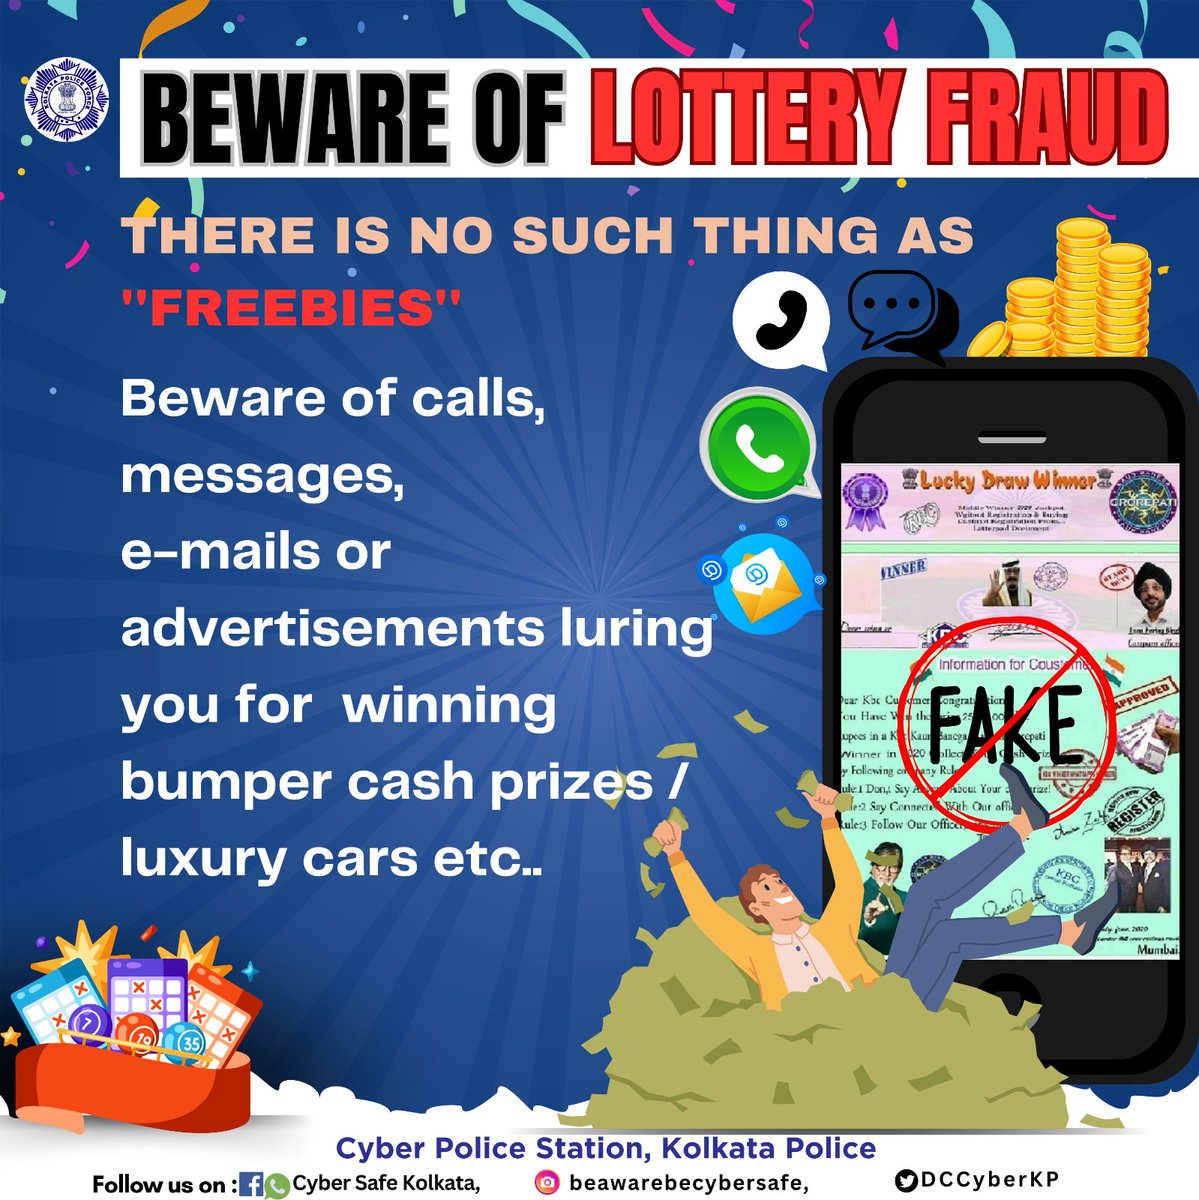 Beware of Lottery Fraud. Stay aware & be safe. #cybersafety #cyberaware